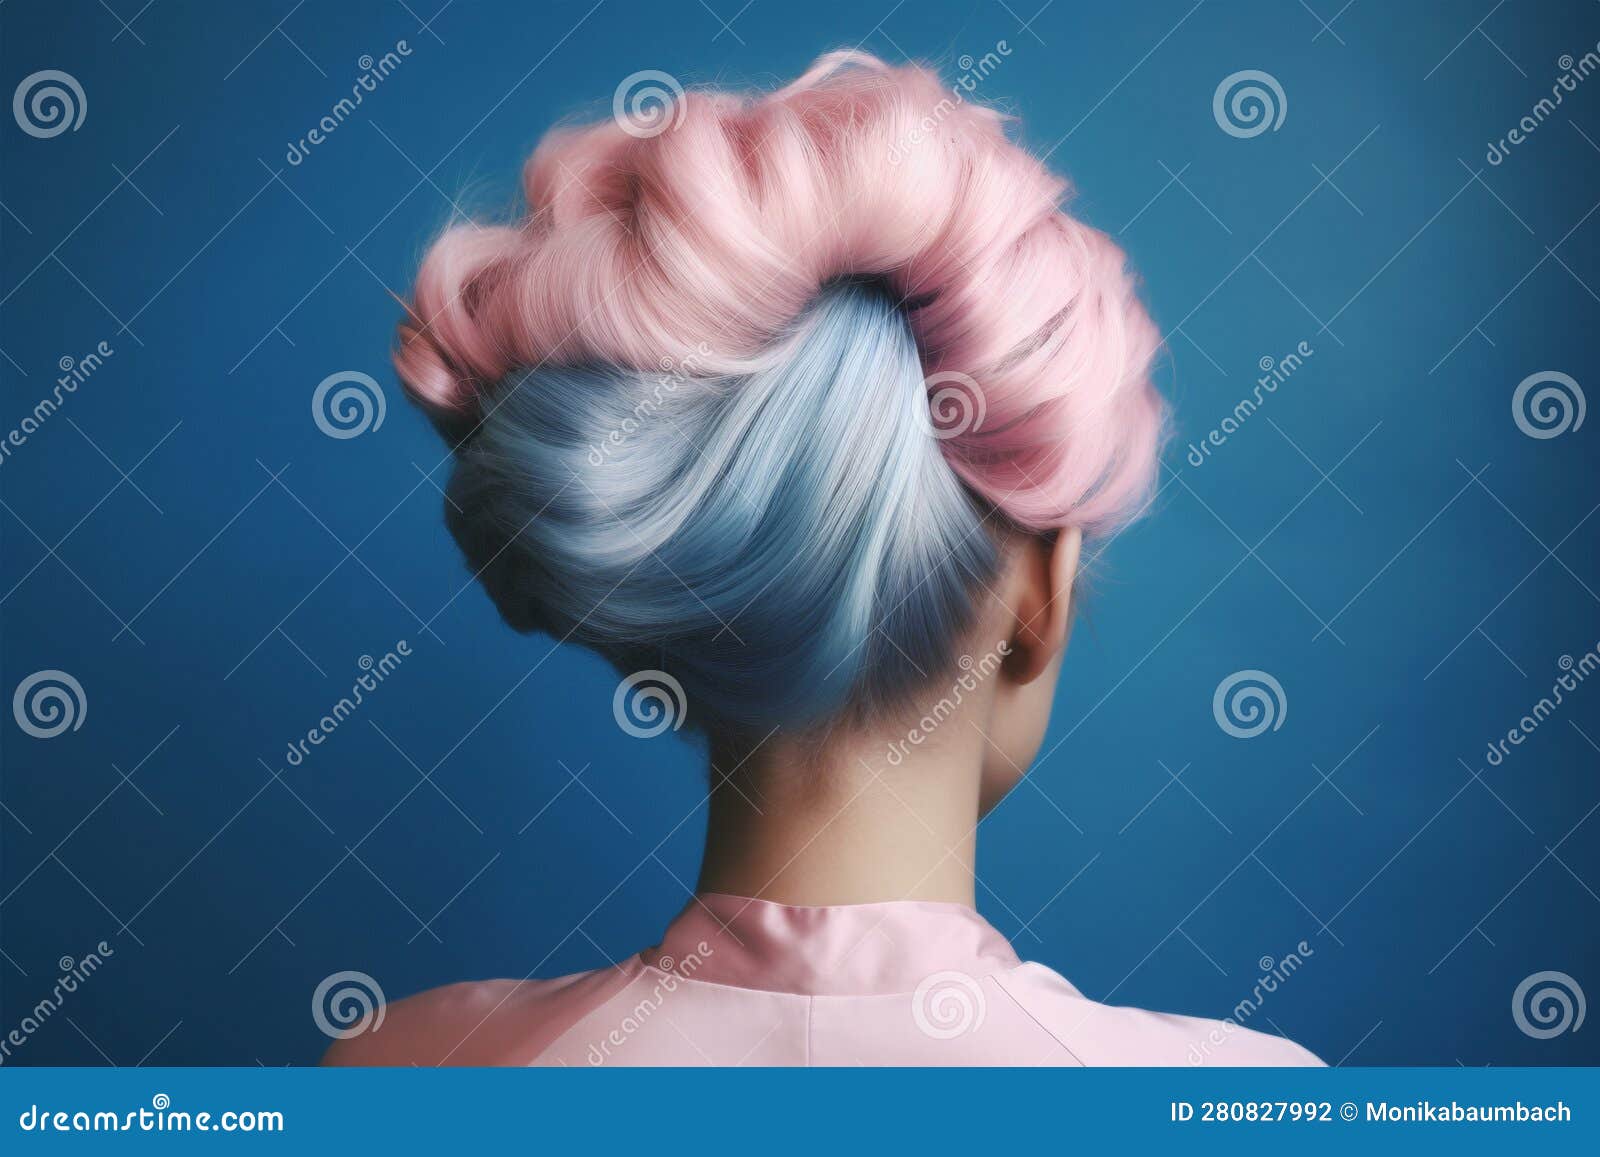 1. "How to Achieve a Stunning Pink and Blue Hair Combination" - wide 8